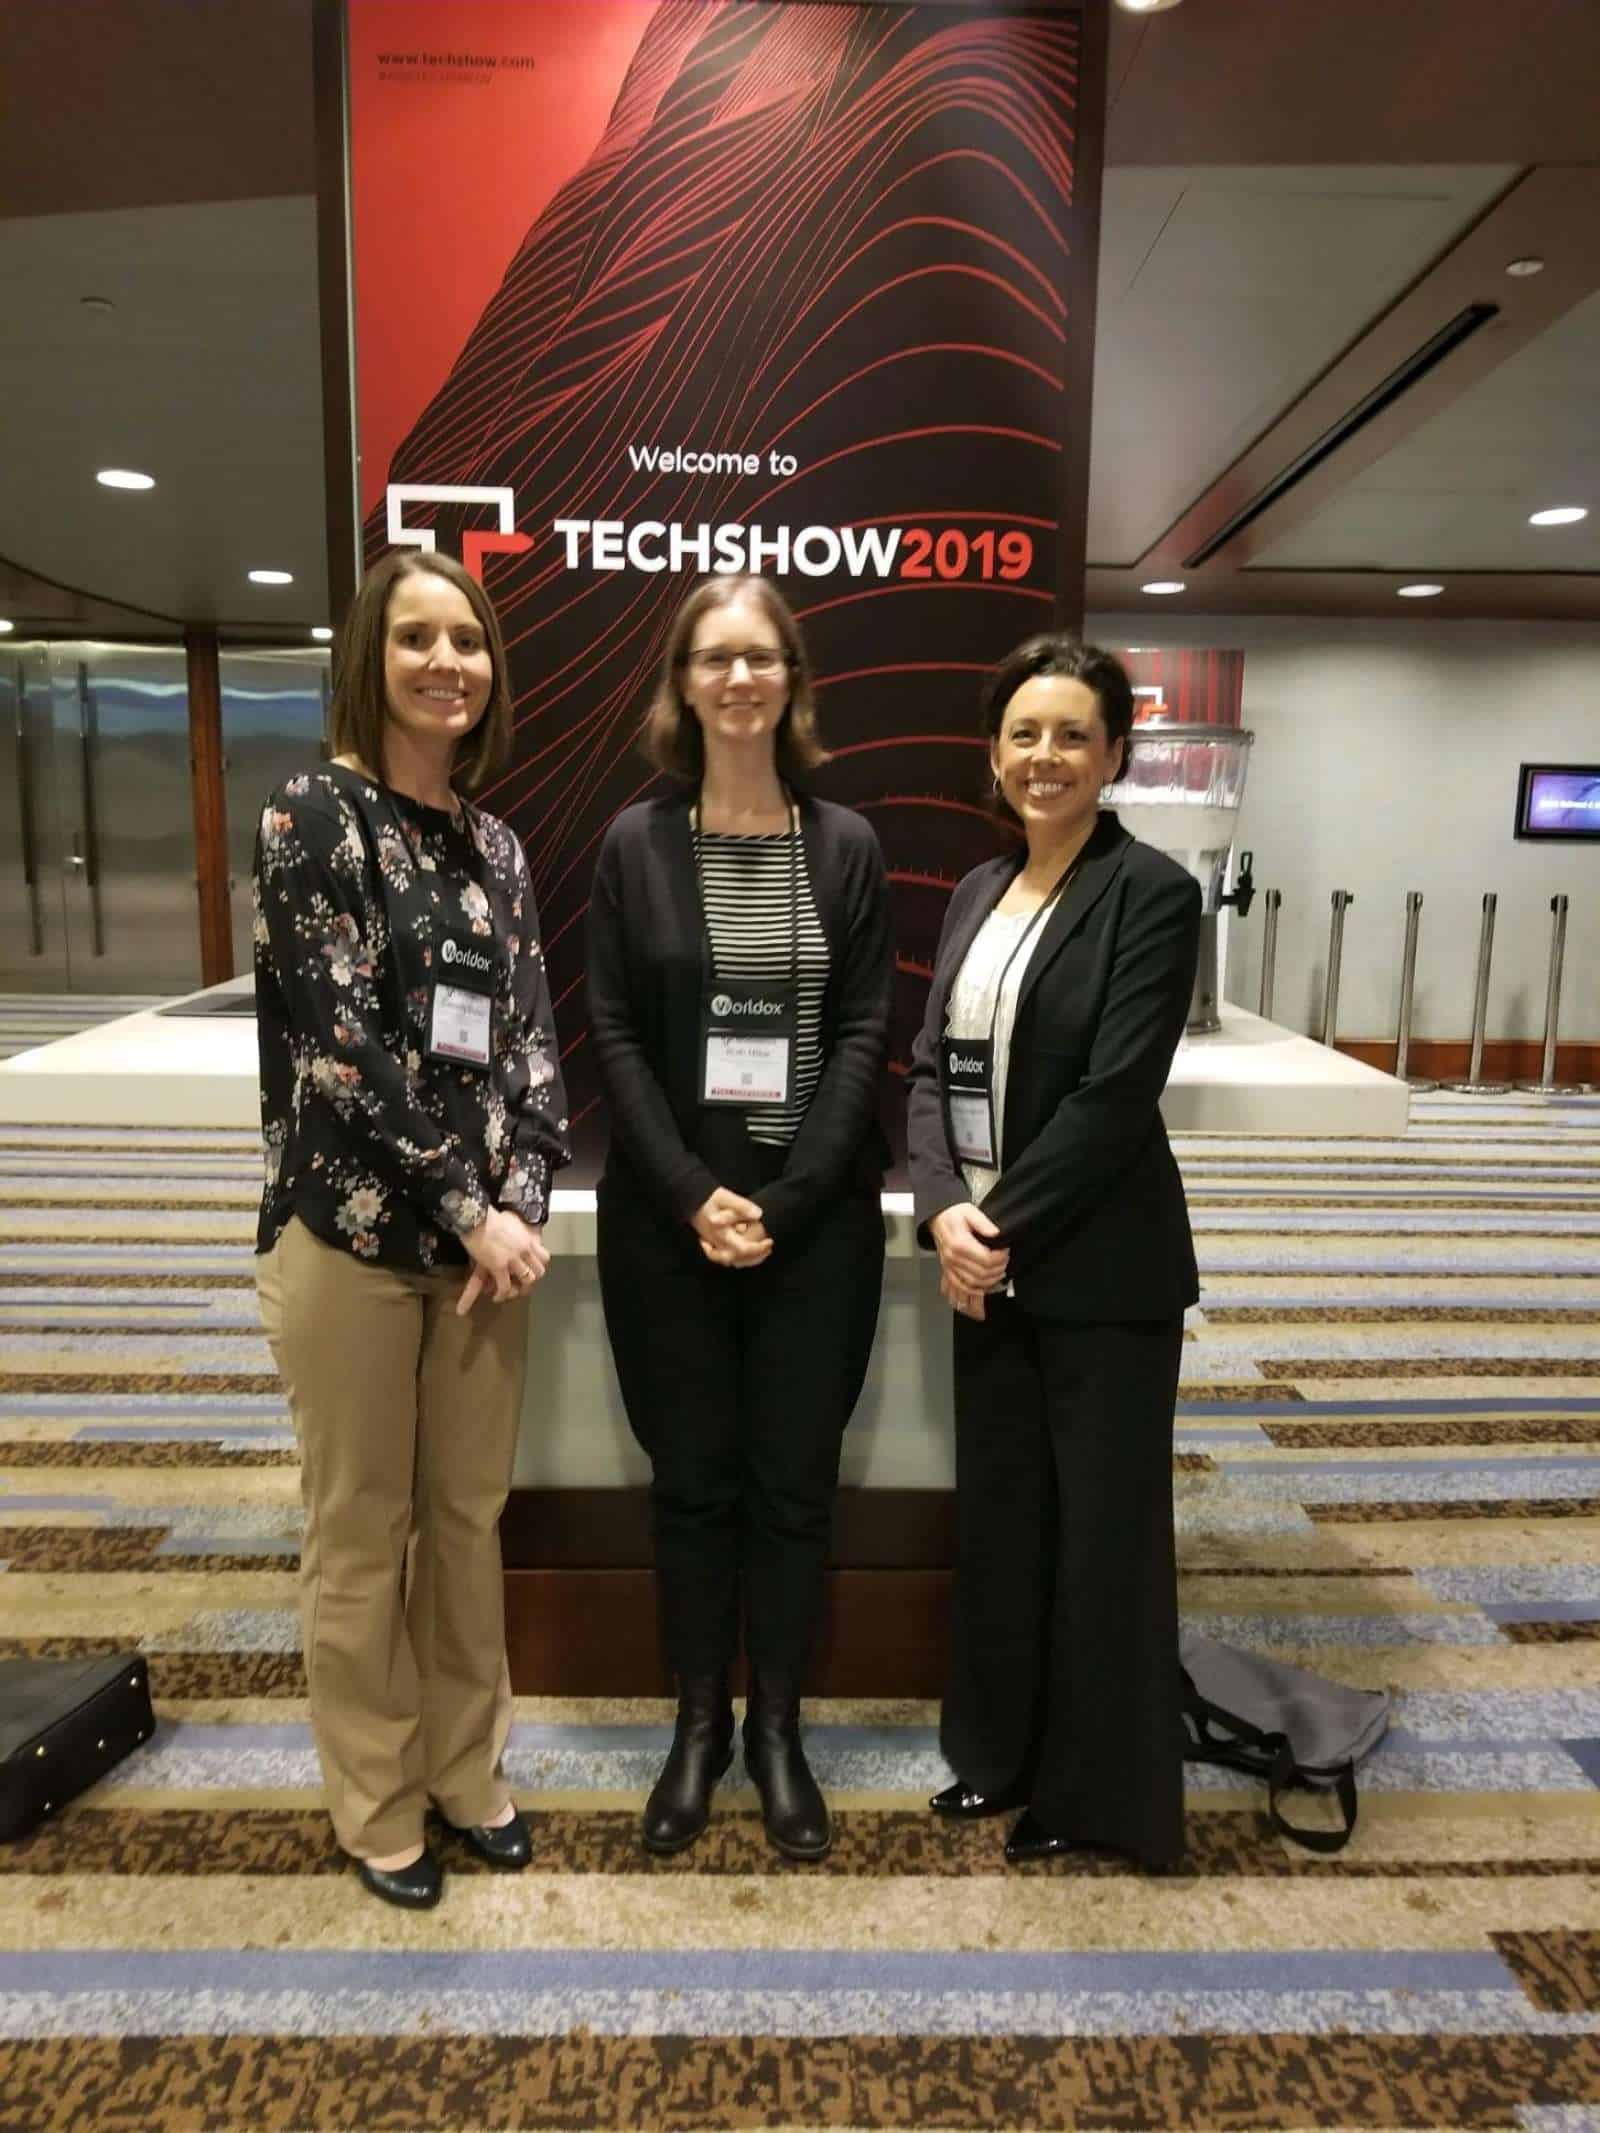 The Lynn Jackson team stays up-to-date on legal technologies at the ABA TECHSHOW